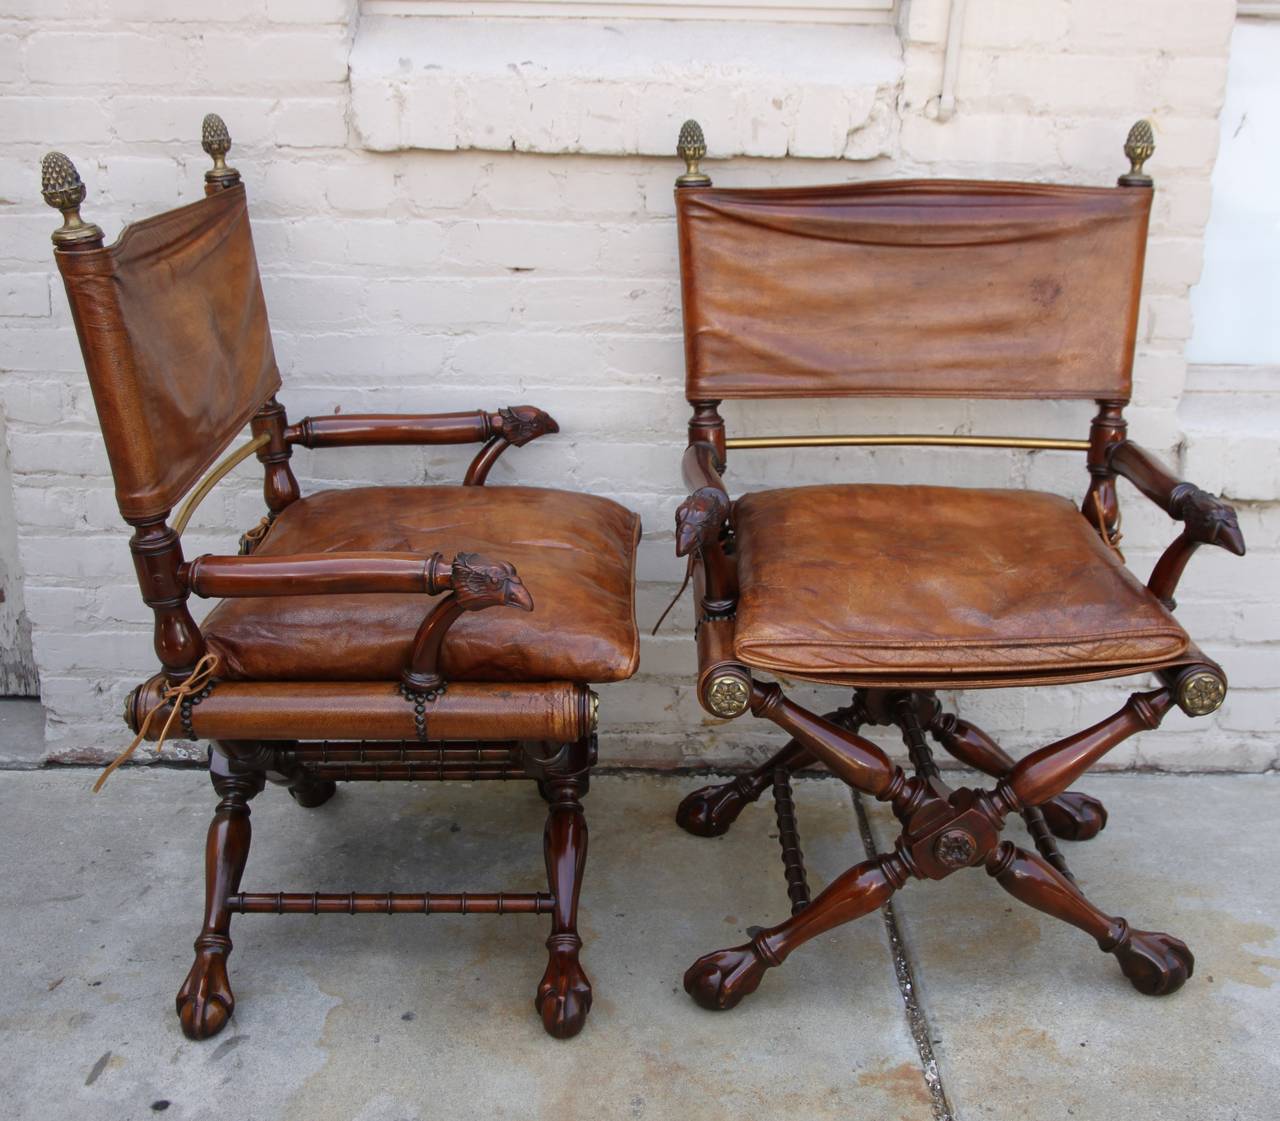 Pair of early 20th century American mahogany, leather and brass Campaign style armchairs.